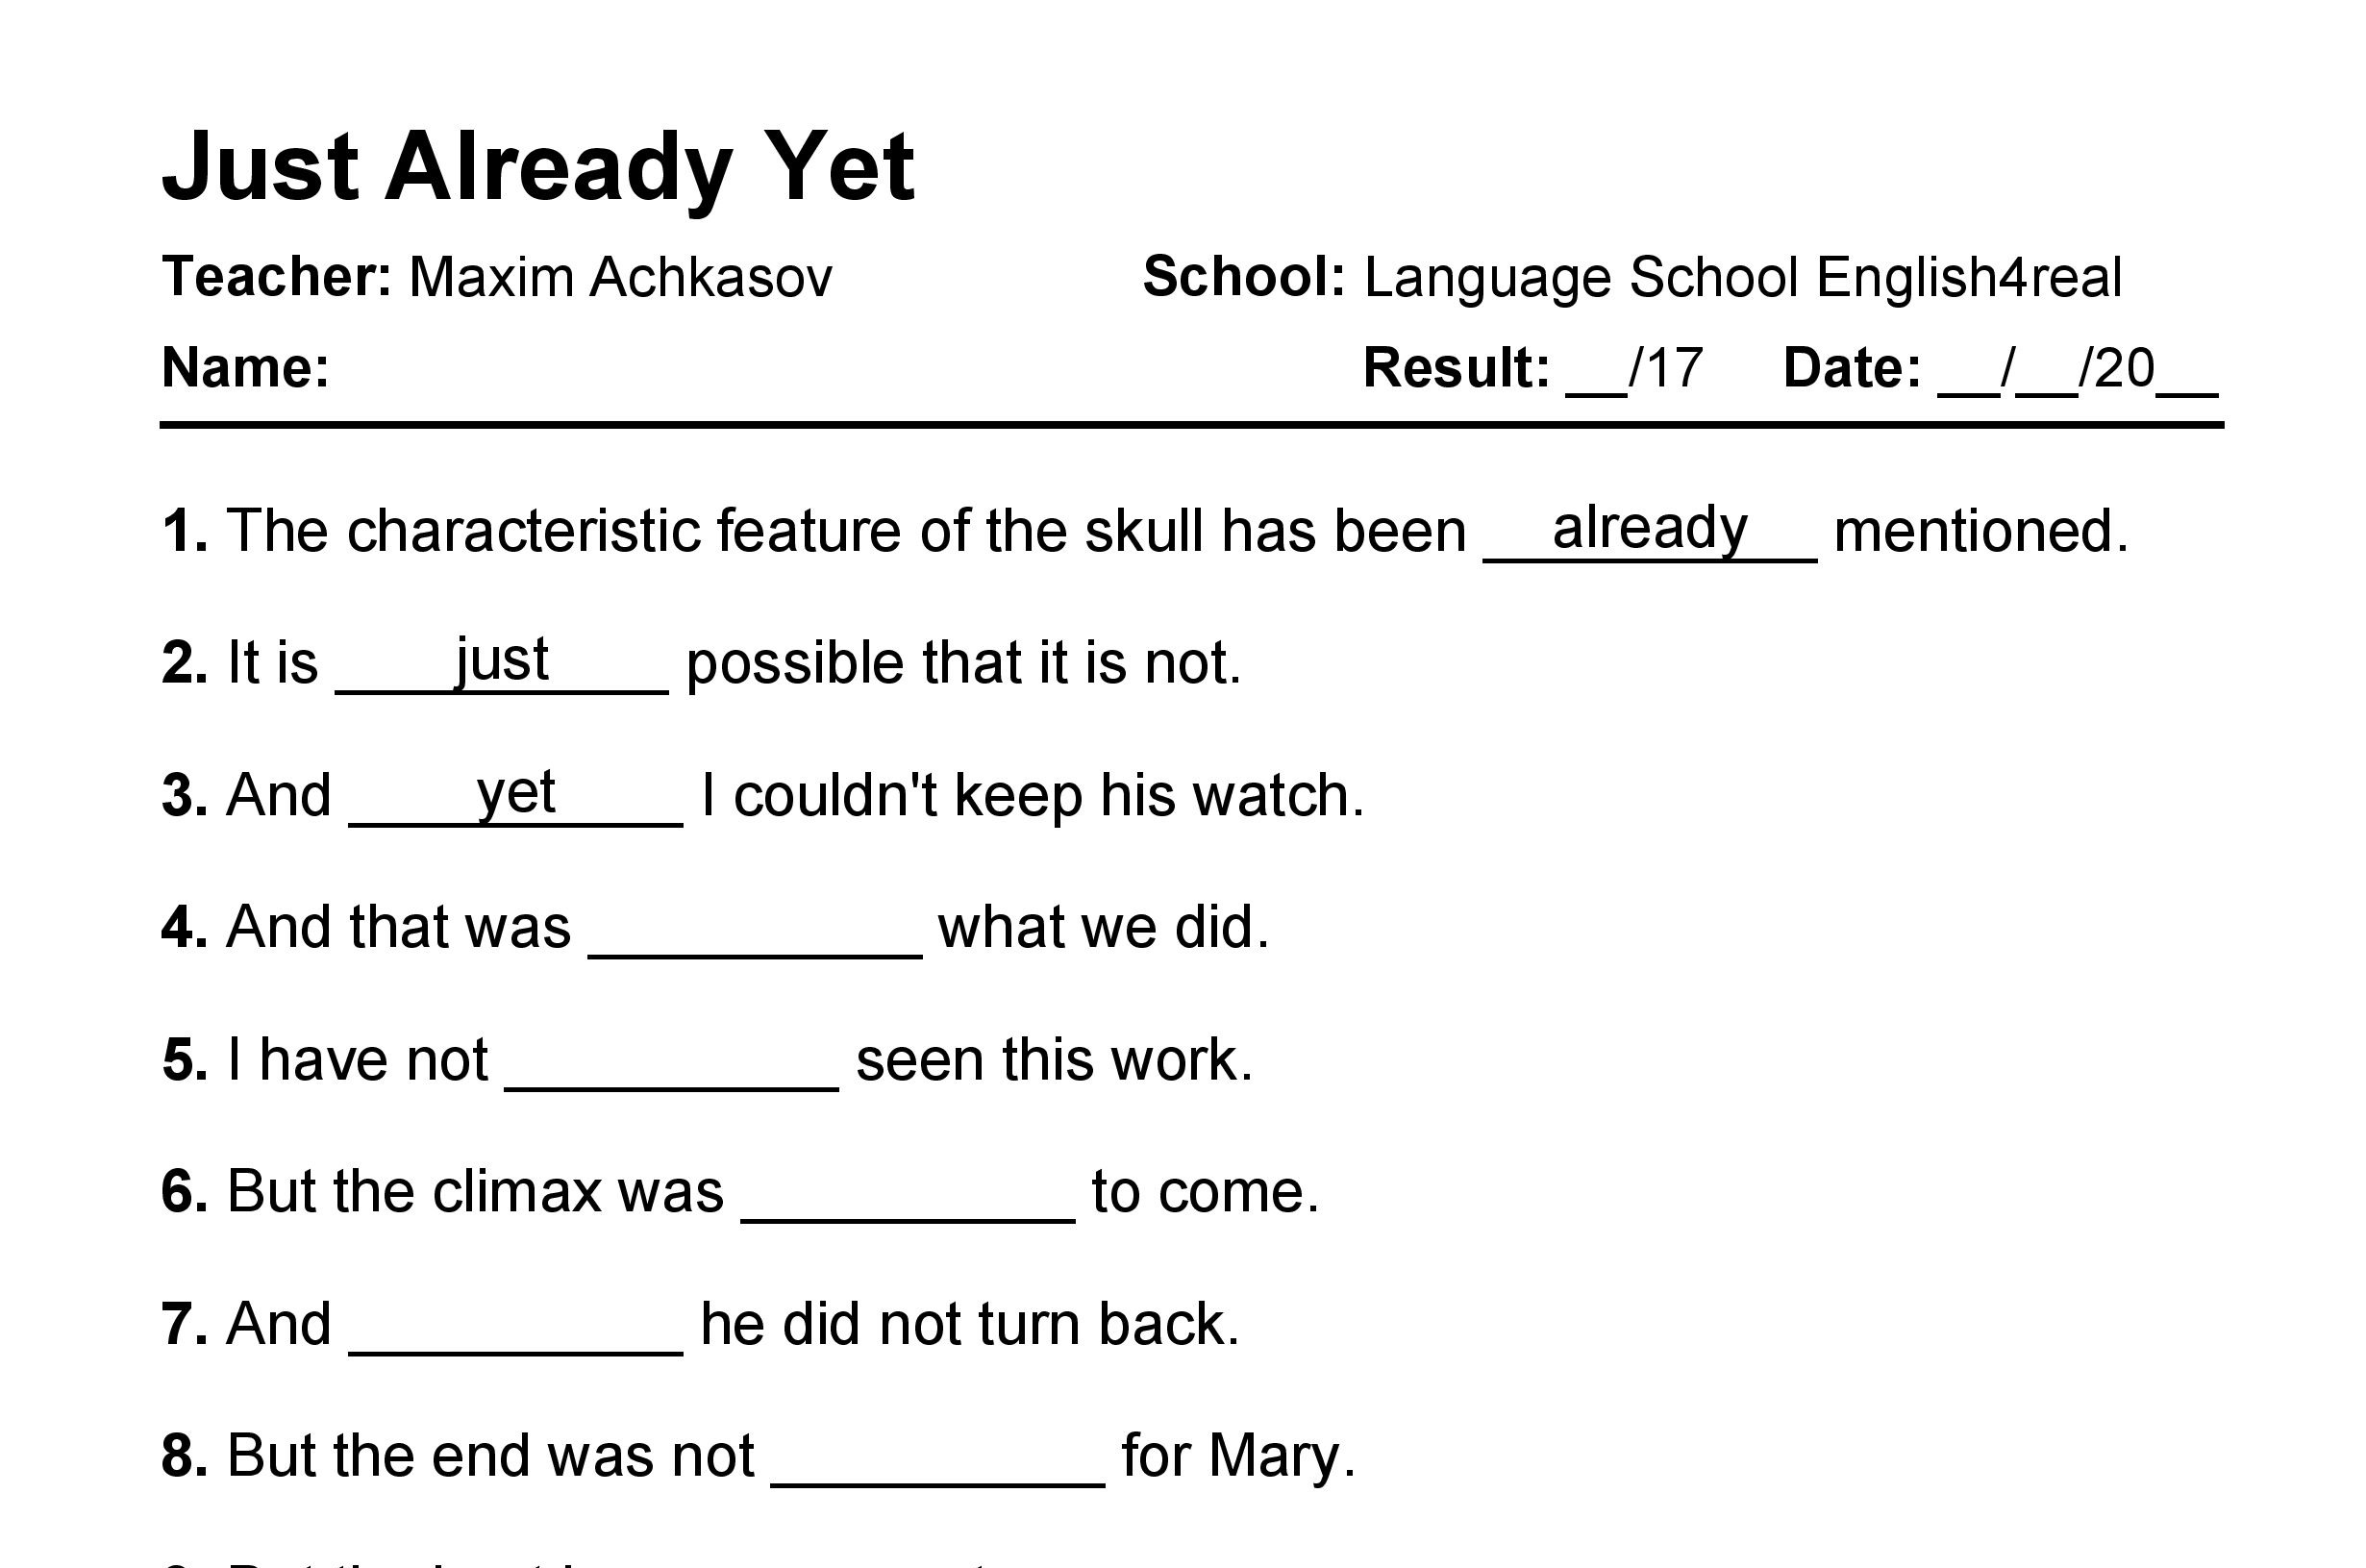 English grammar fill in the blanks exercises with answers in PDF - Just vs. Already vs. Yet